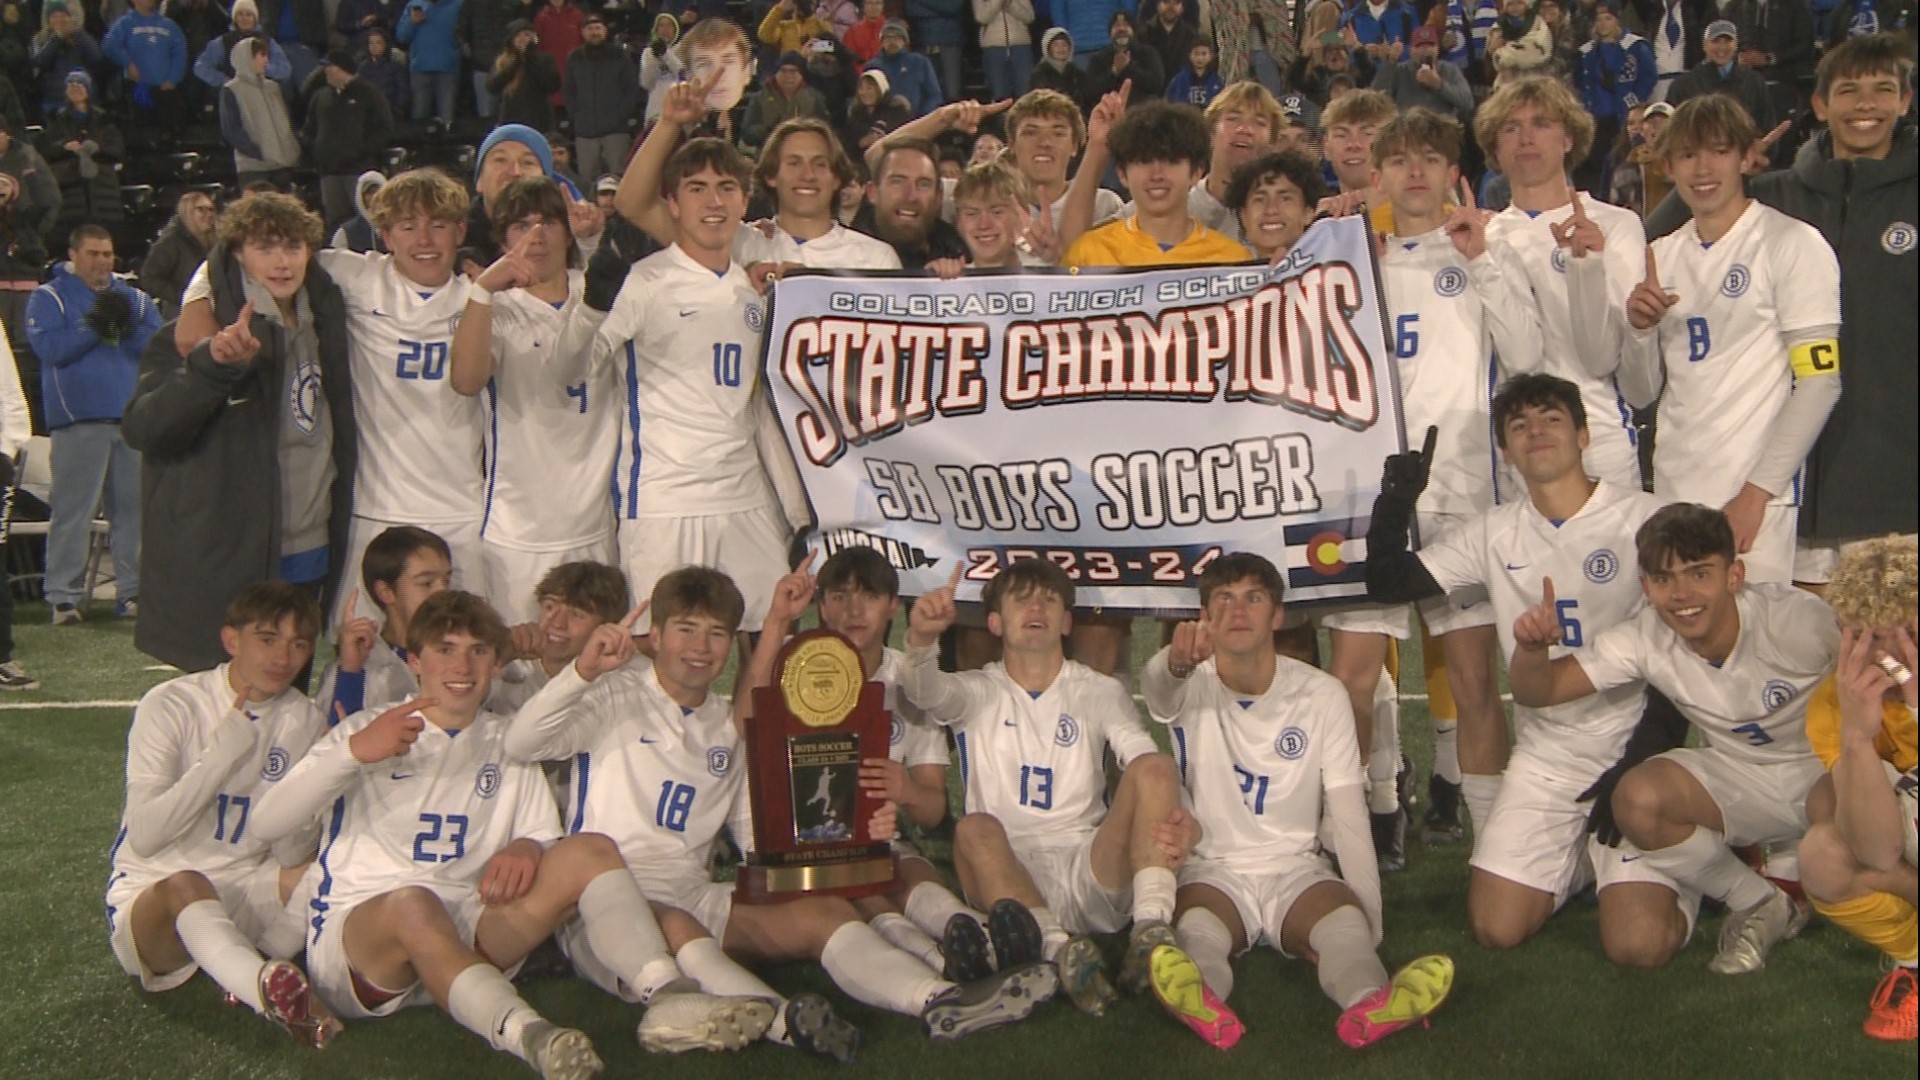 The Eagles defeated the defending champion Angels on penalty kicks to capture the Class 5A state crown.